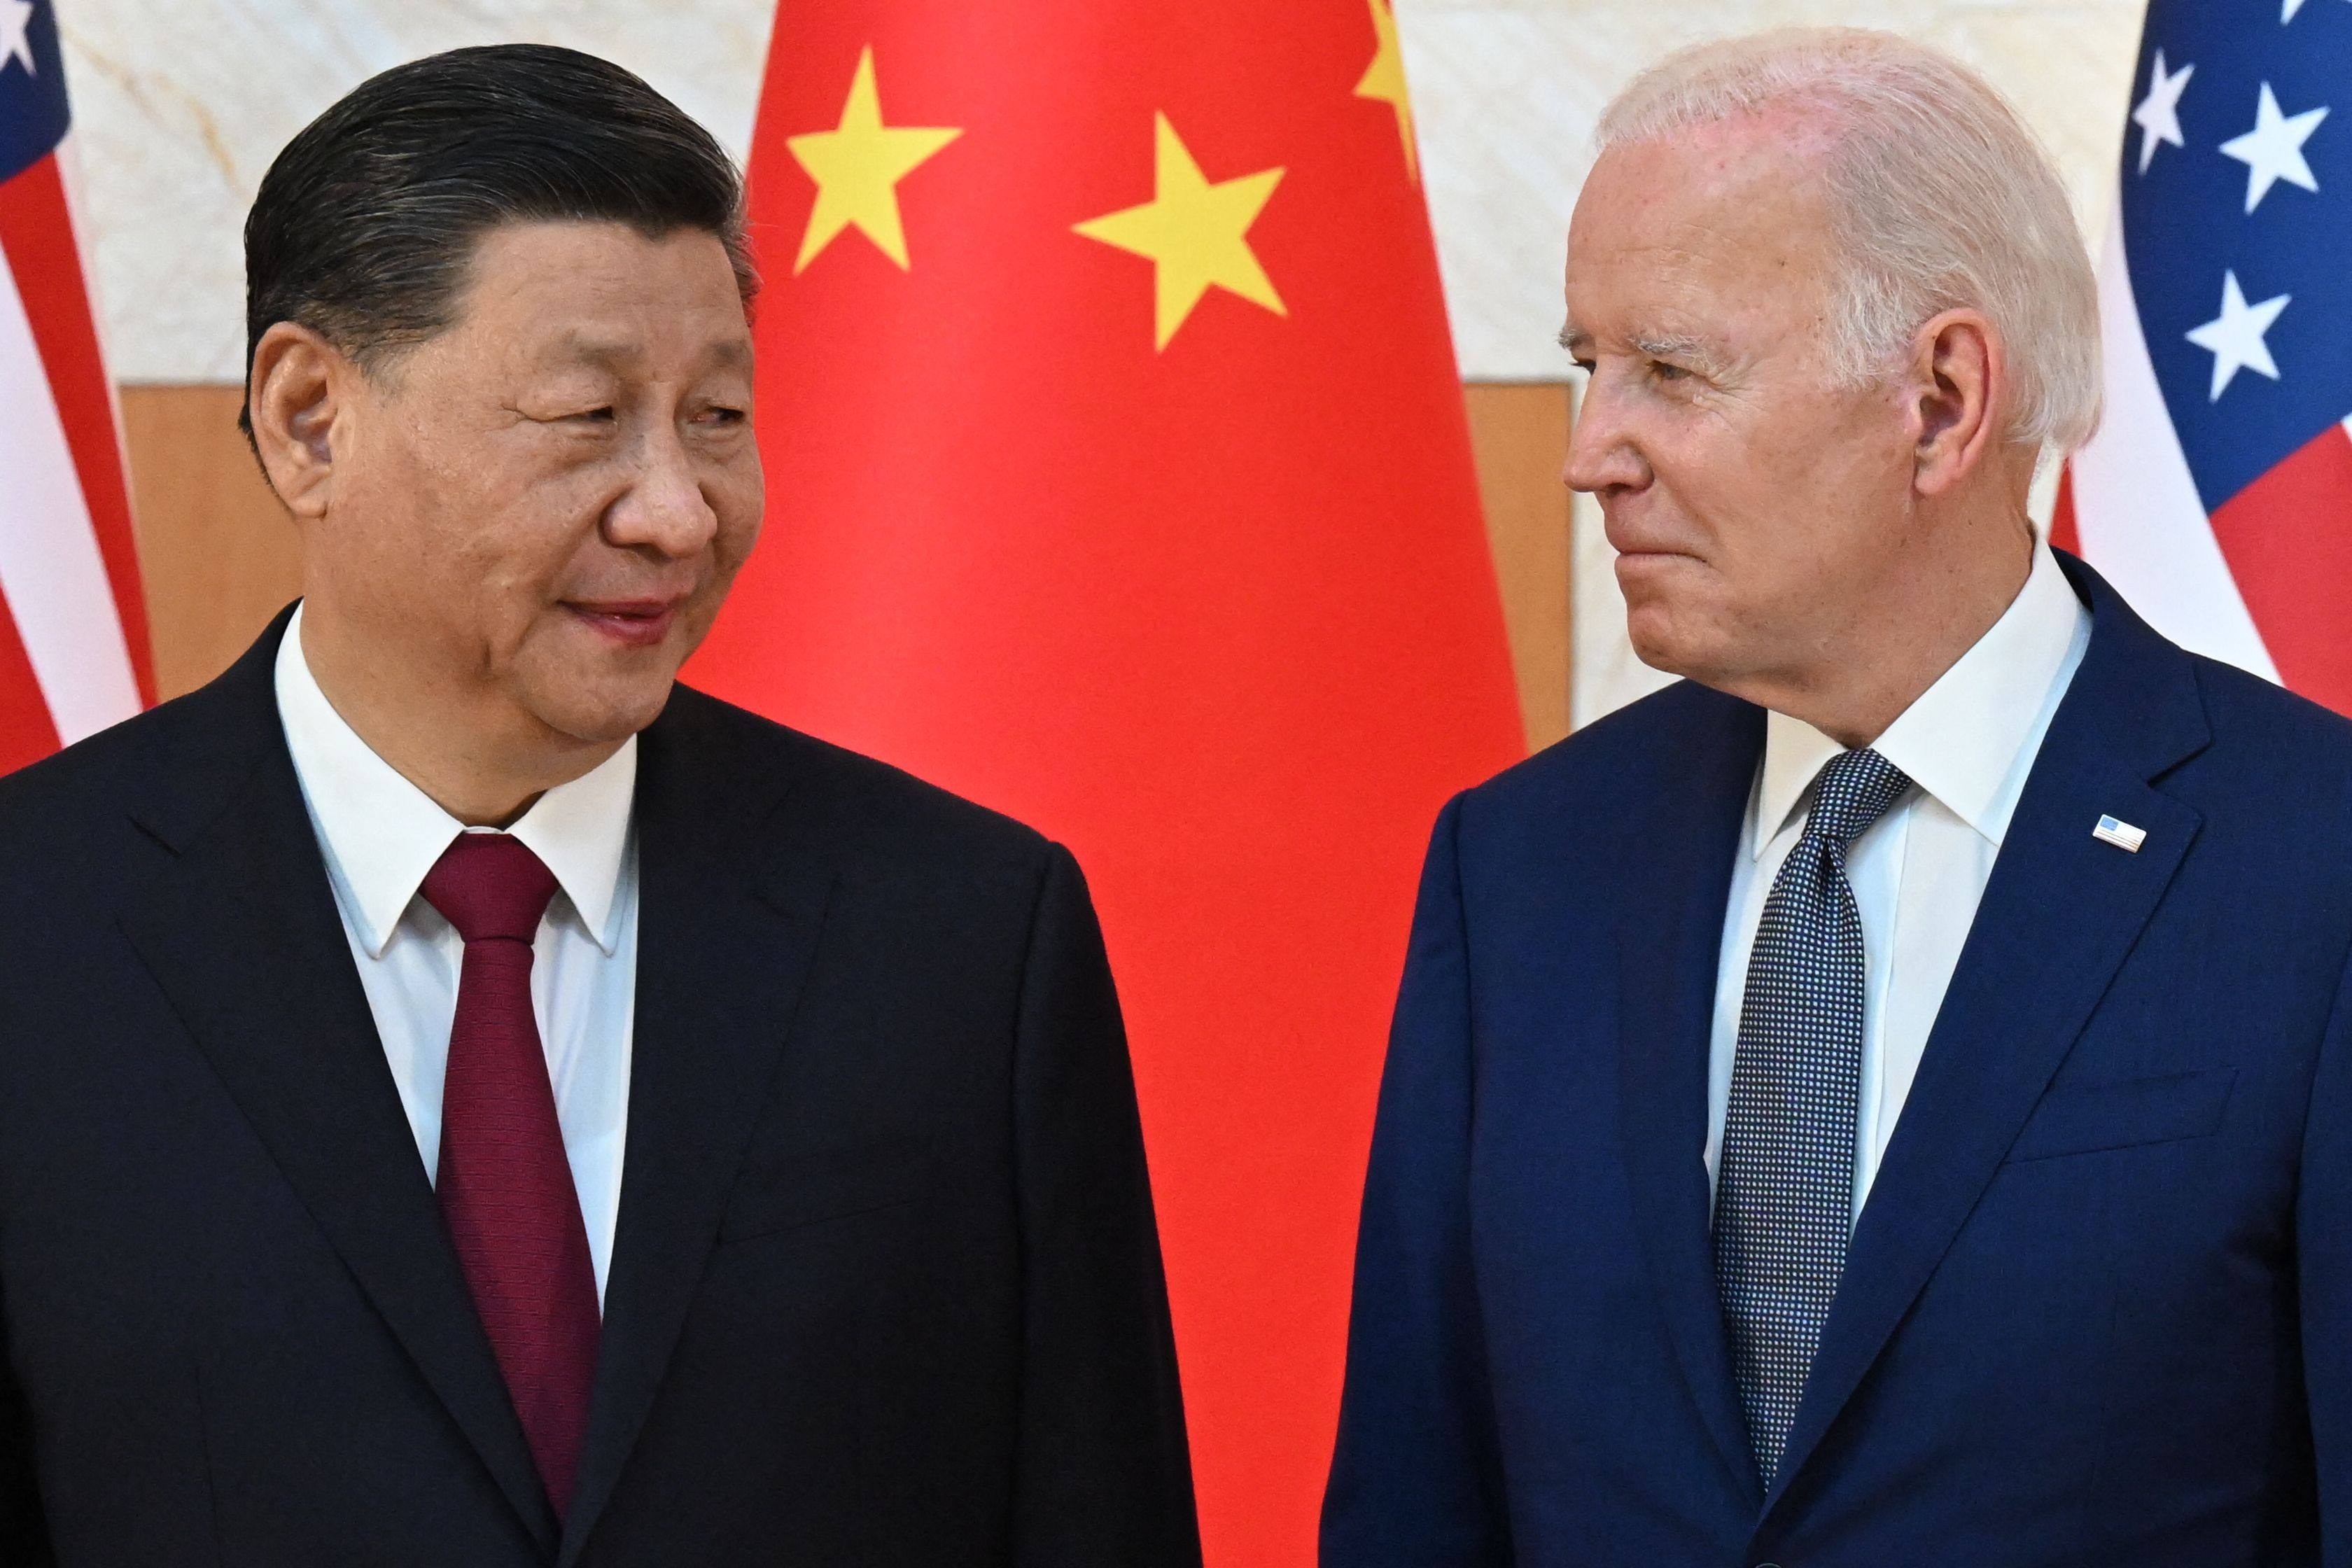 Chinese President Xi Jinping and US President Joe Biden each touted their political system as the future in speeches on Tuesday. Photo: AFP